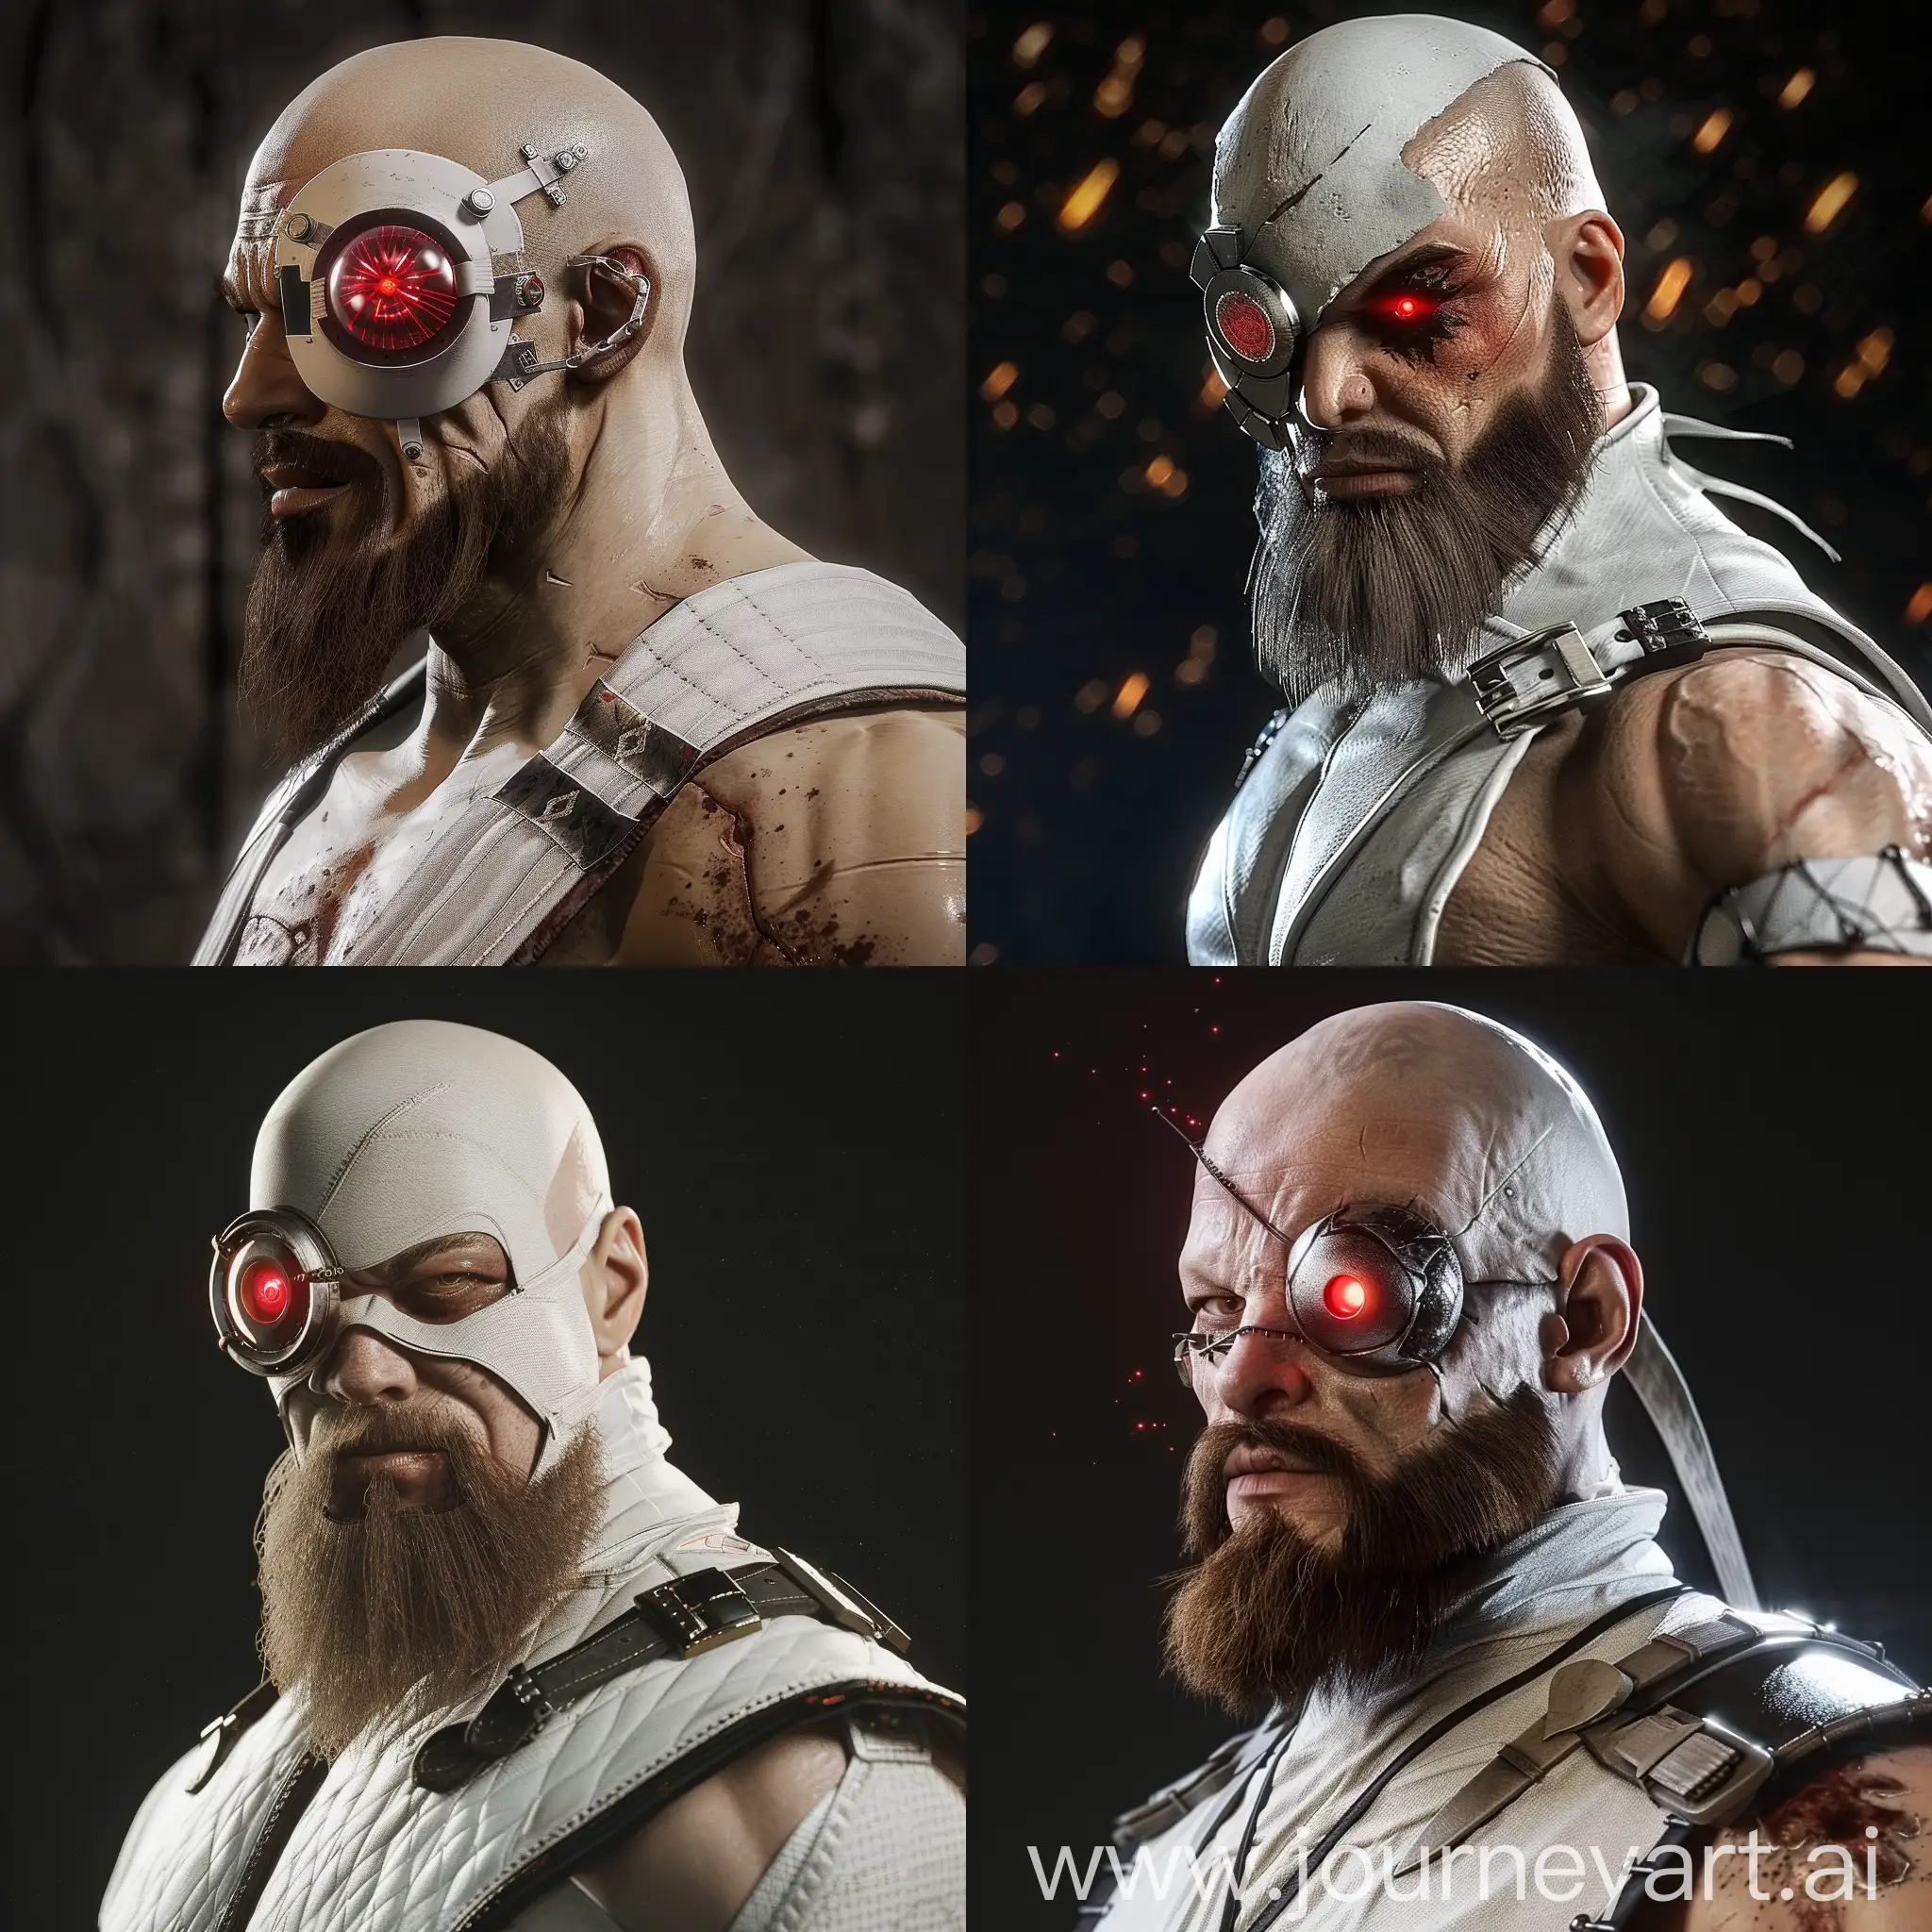 A character from Mortal Kombat 1, named "Kano", he wearing a white bandit costume, bald head, he have metal eye implant with red laser eyeball, beard and moustache on face